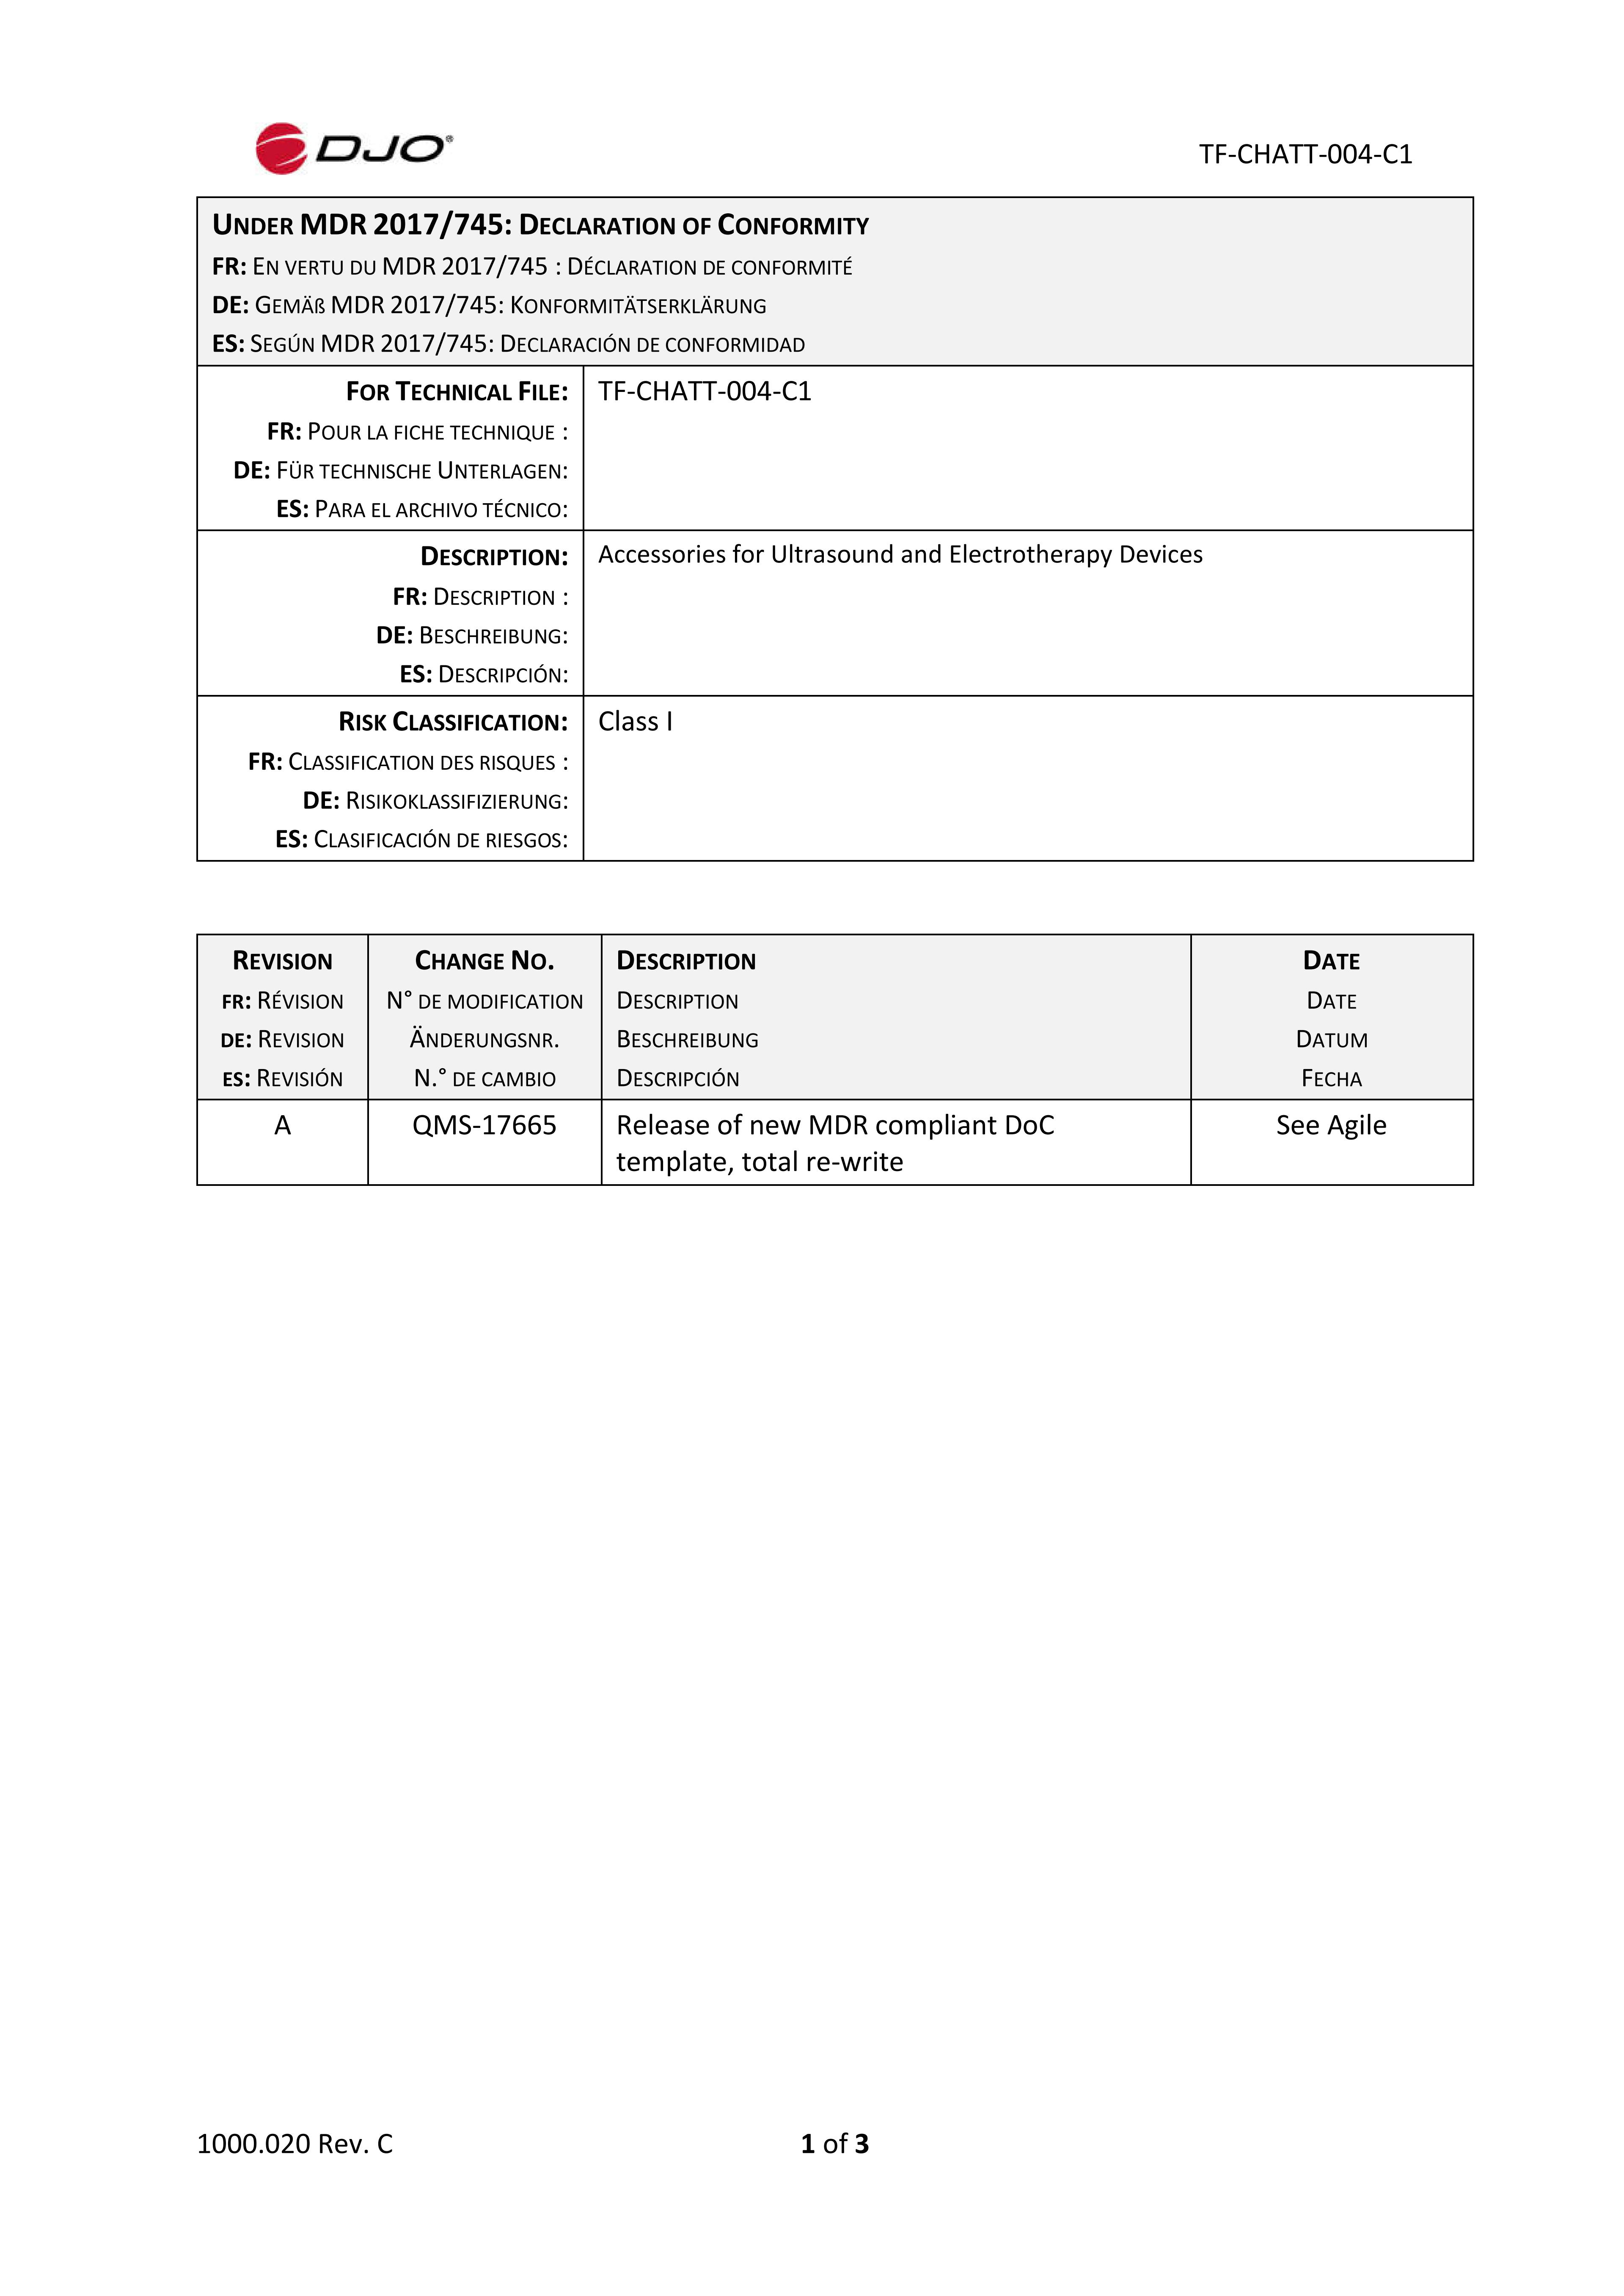 TF-CHATT-004-C1_Rev A_Accessories for Ultrasound and Electrotherapy Class I DoC.pdf